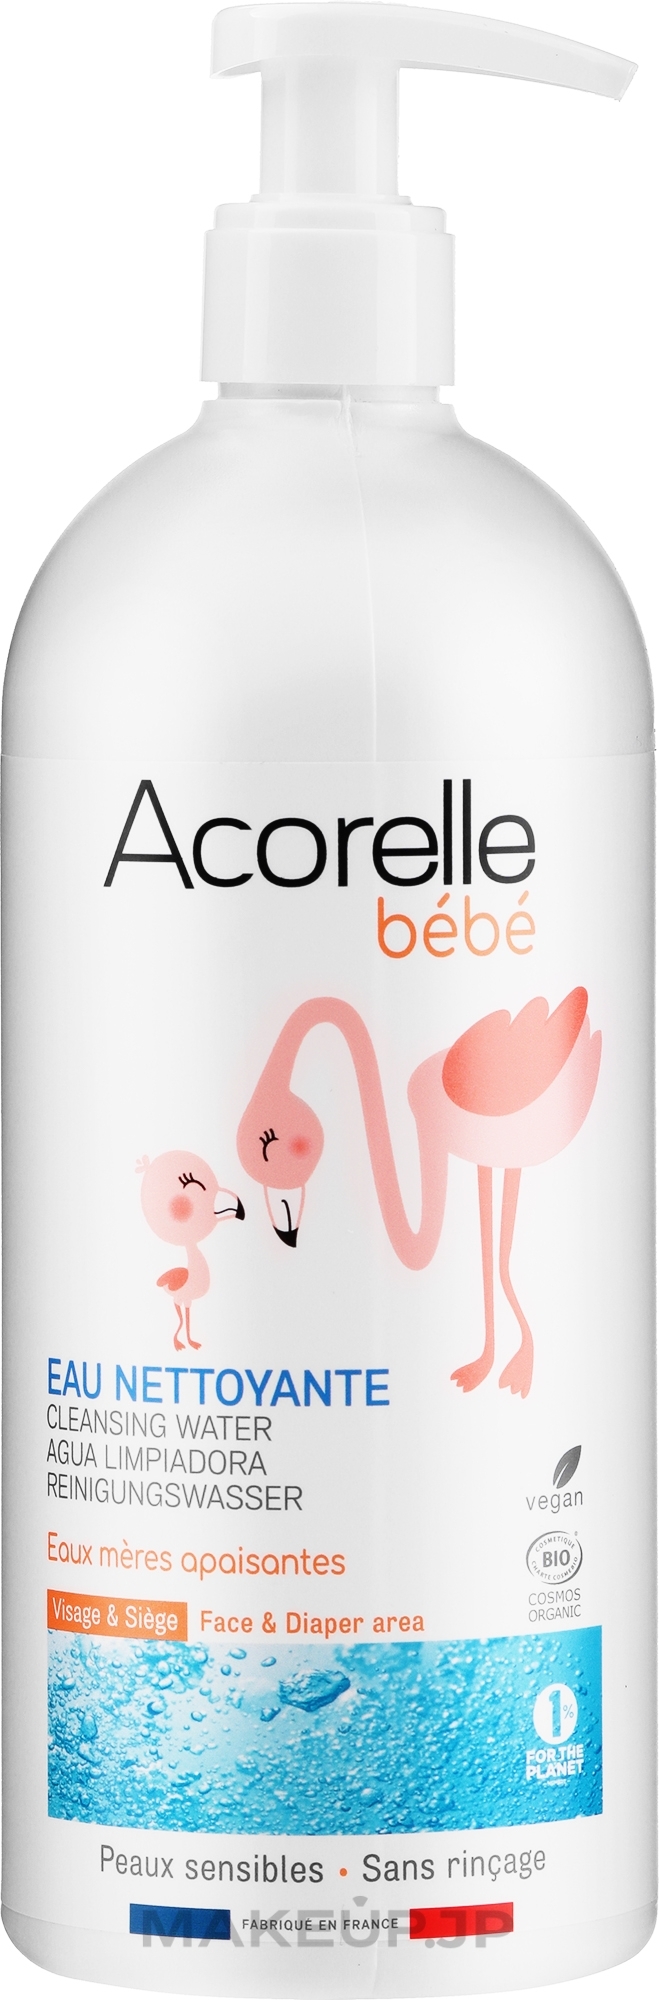 Organic Hypoallergenic Cleansing Water - Acorelle — photo 500 ml